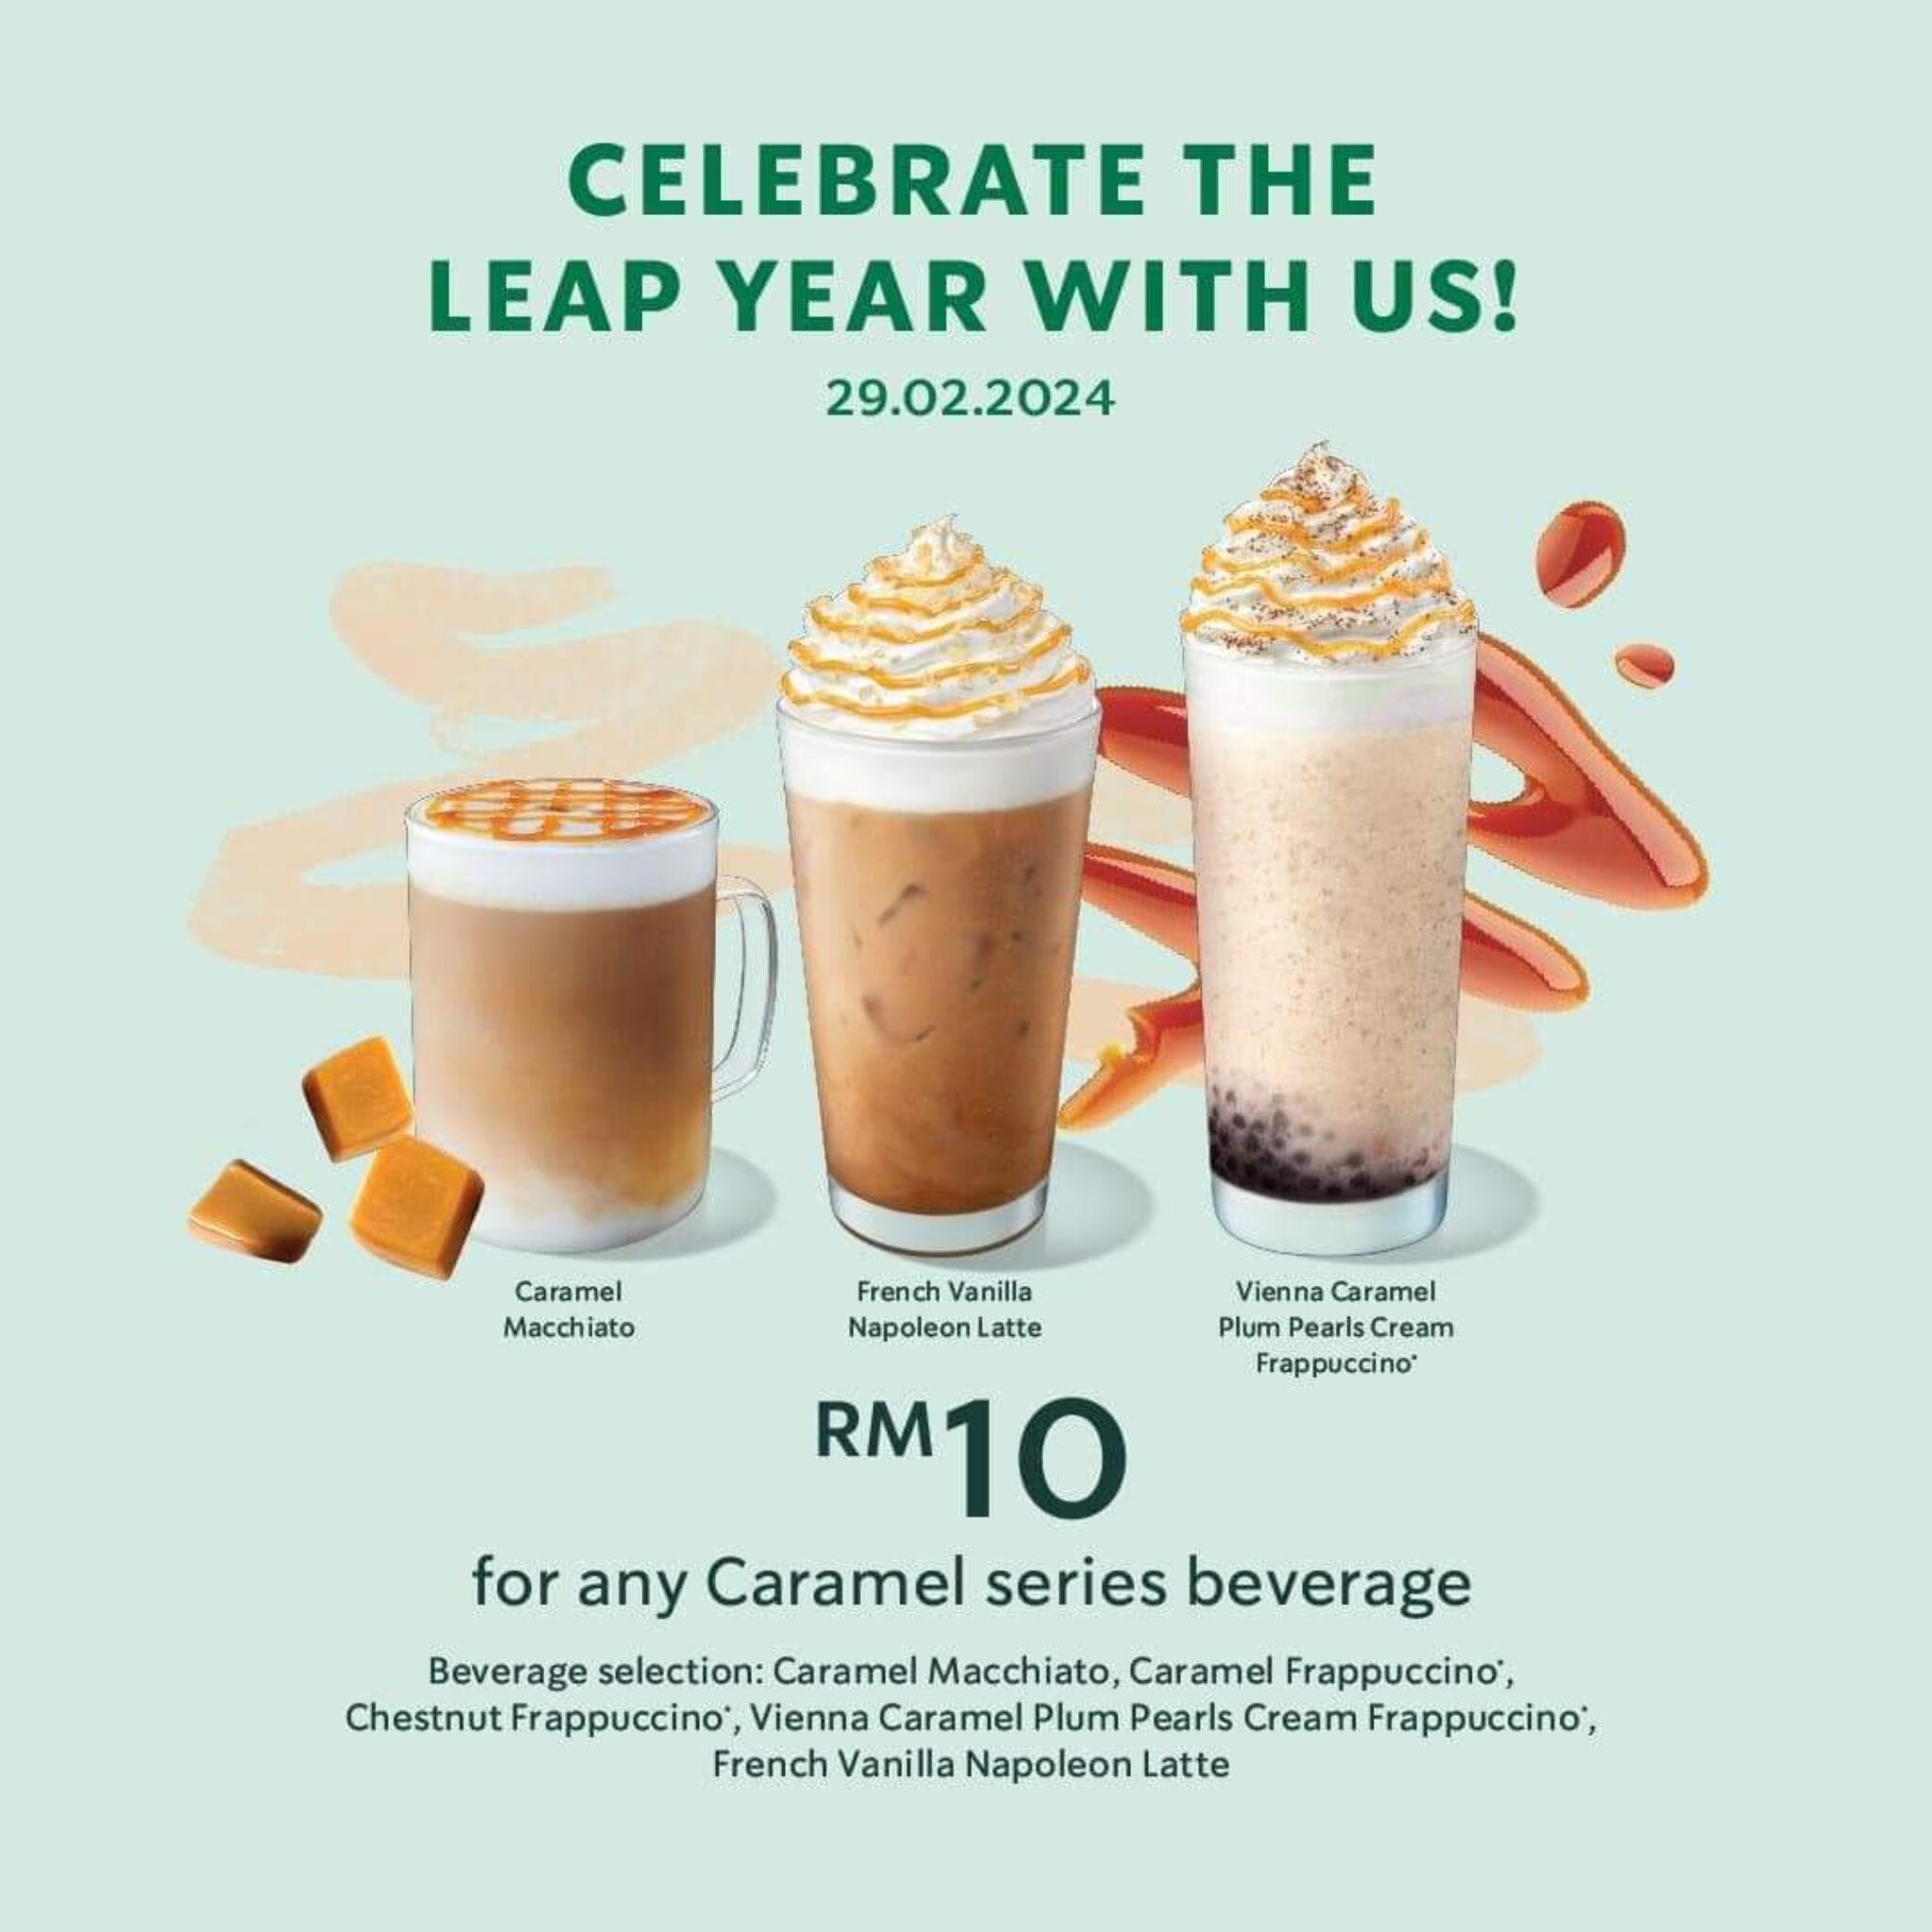 Starbucks Leap Year 2024 Special Promo RM10 for Caramel Series Beverages!